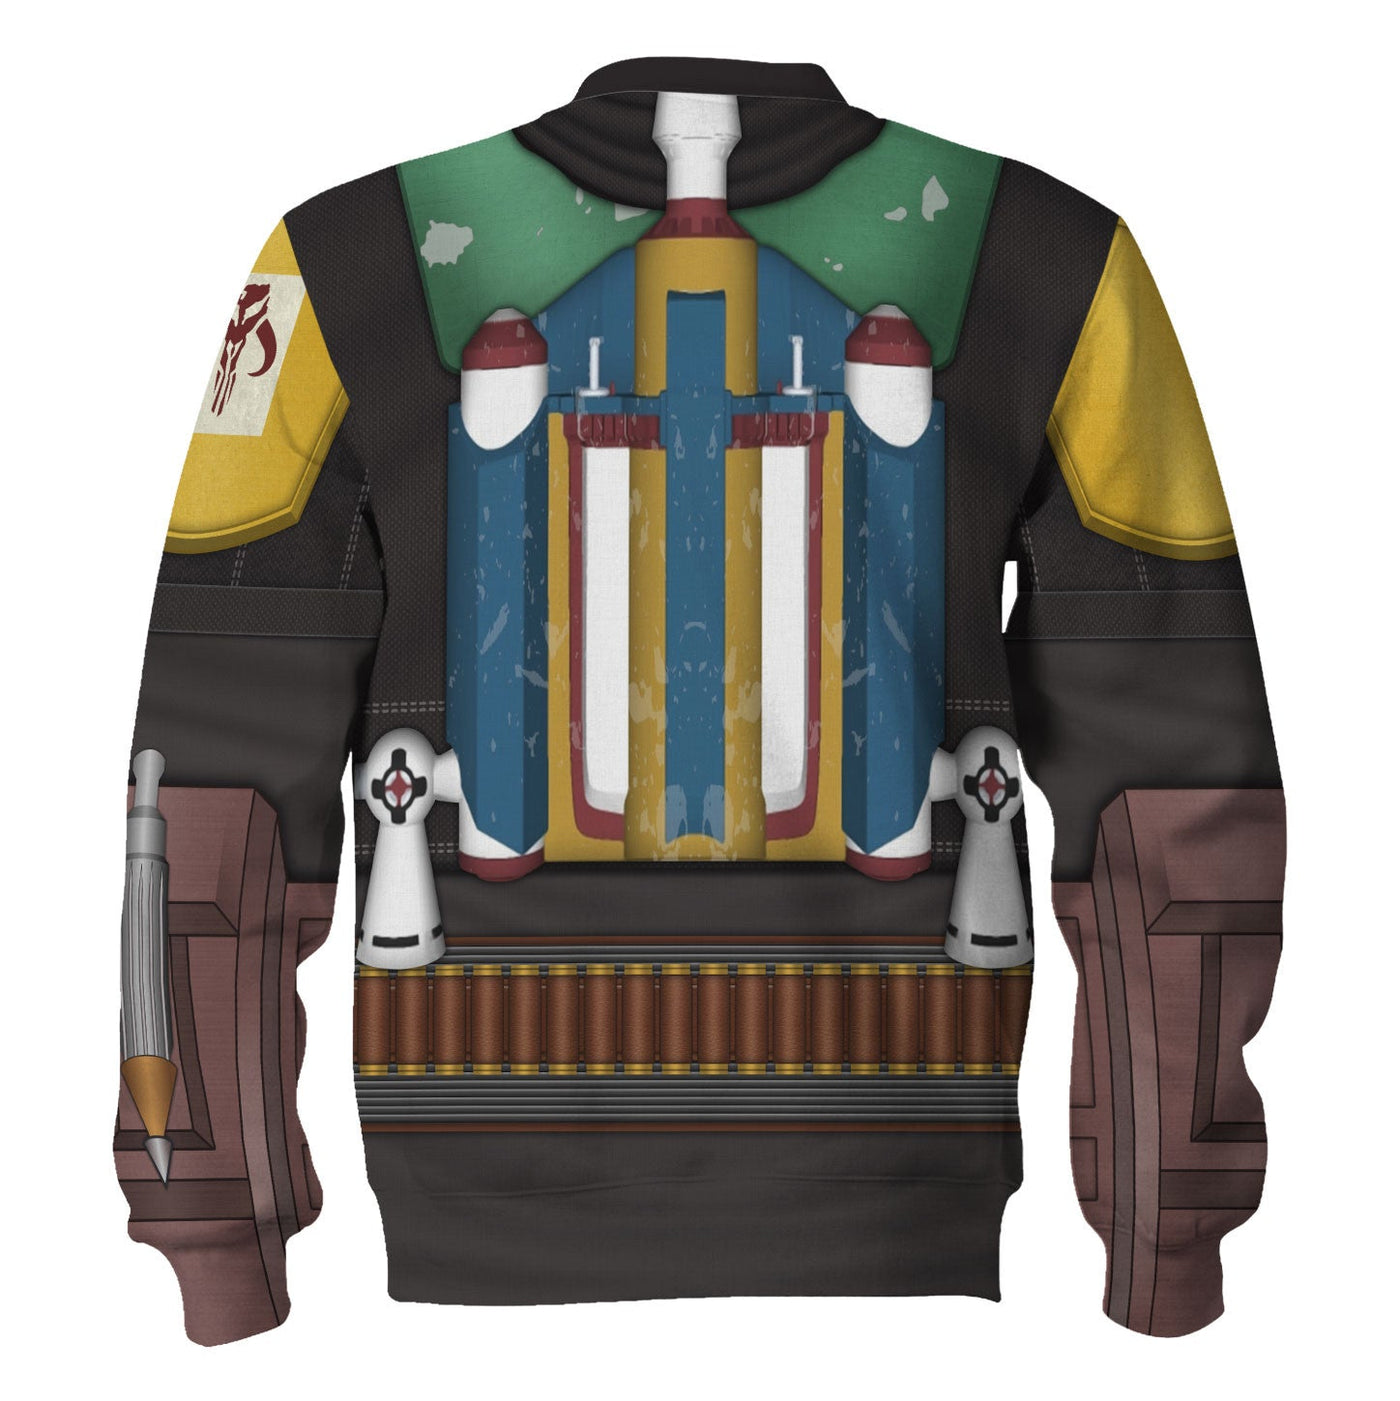 Star Wars The Book Of Boba Fett Costume - Sweater - Ugly Christmas Sweater